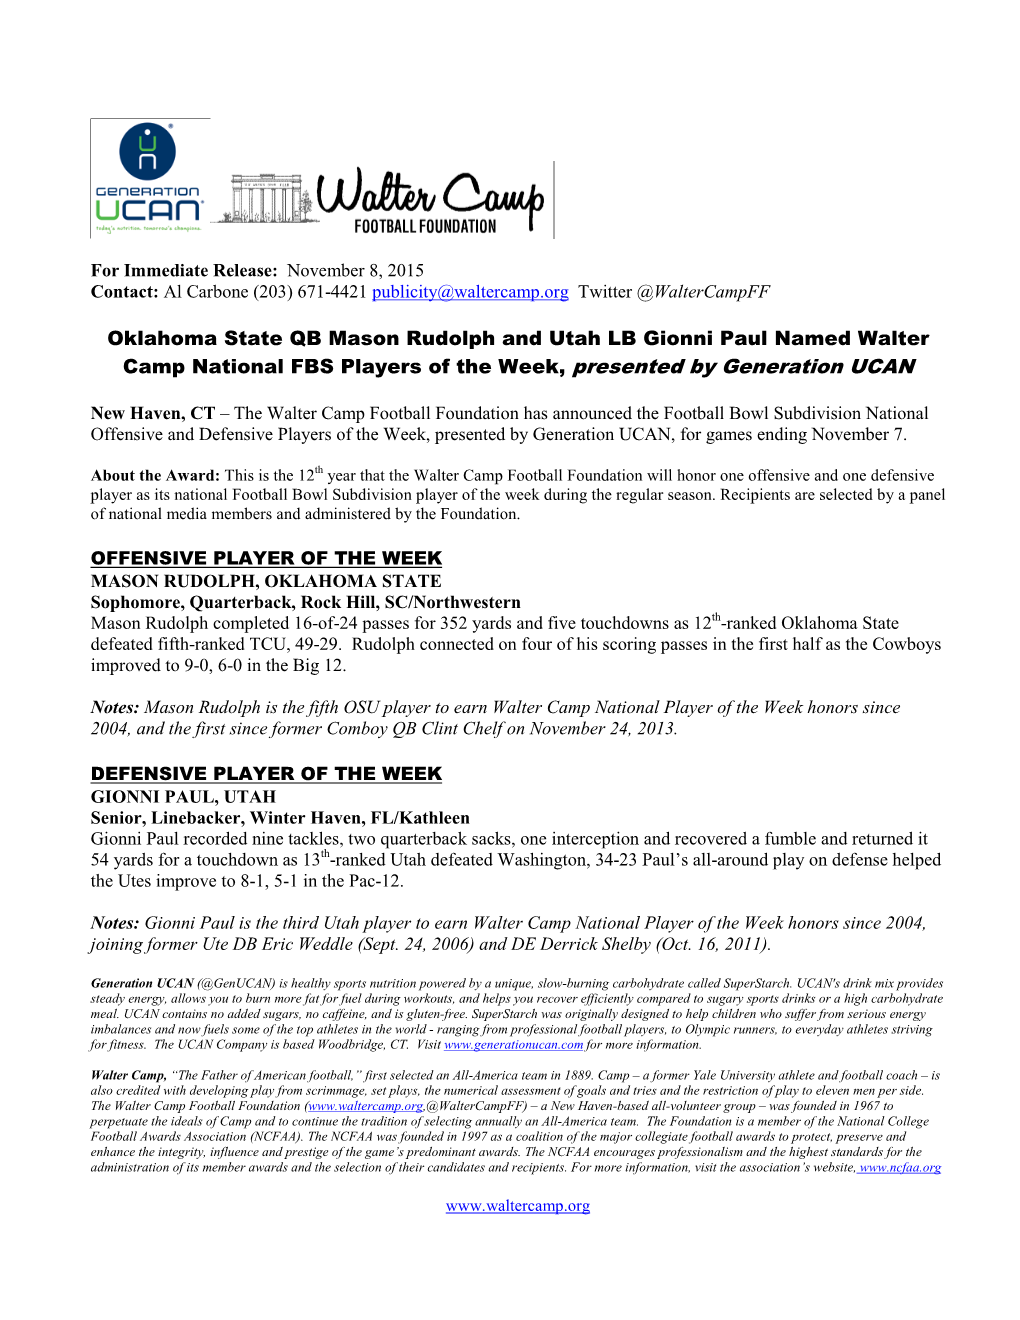 UCANN Generation to Sponsor Walter Camp National College Football Players of the Week